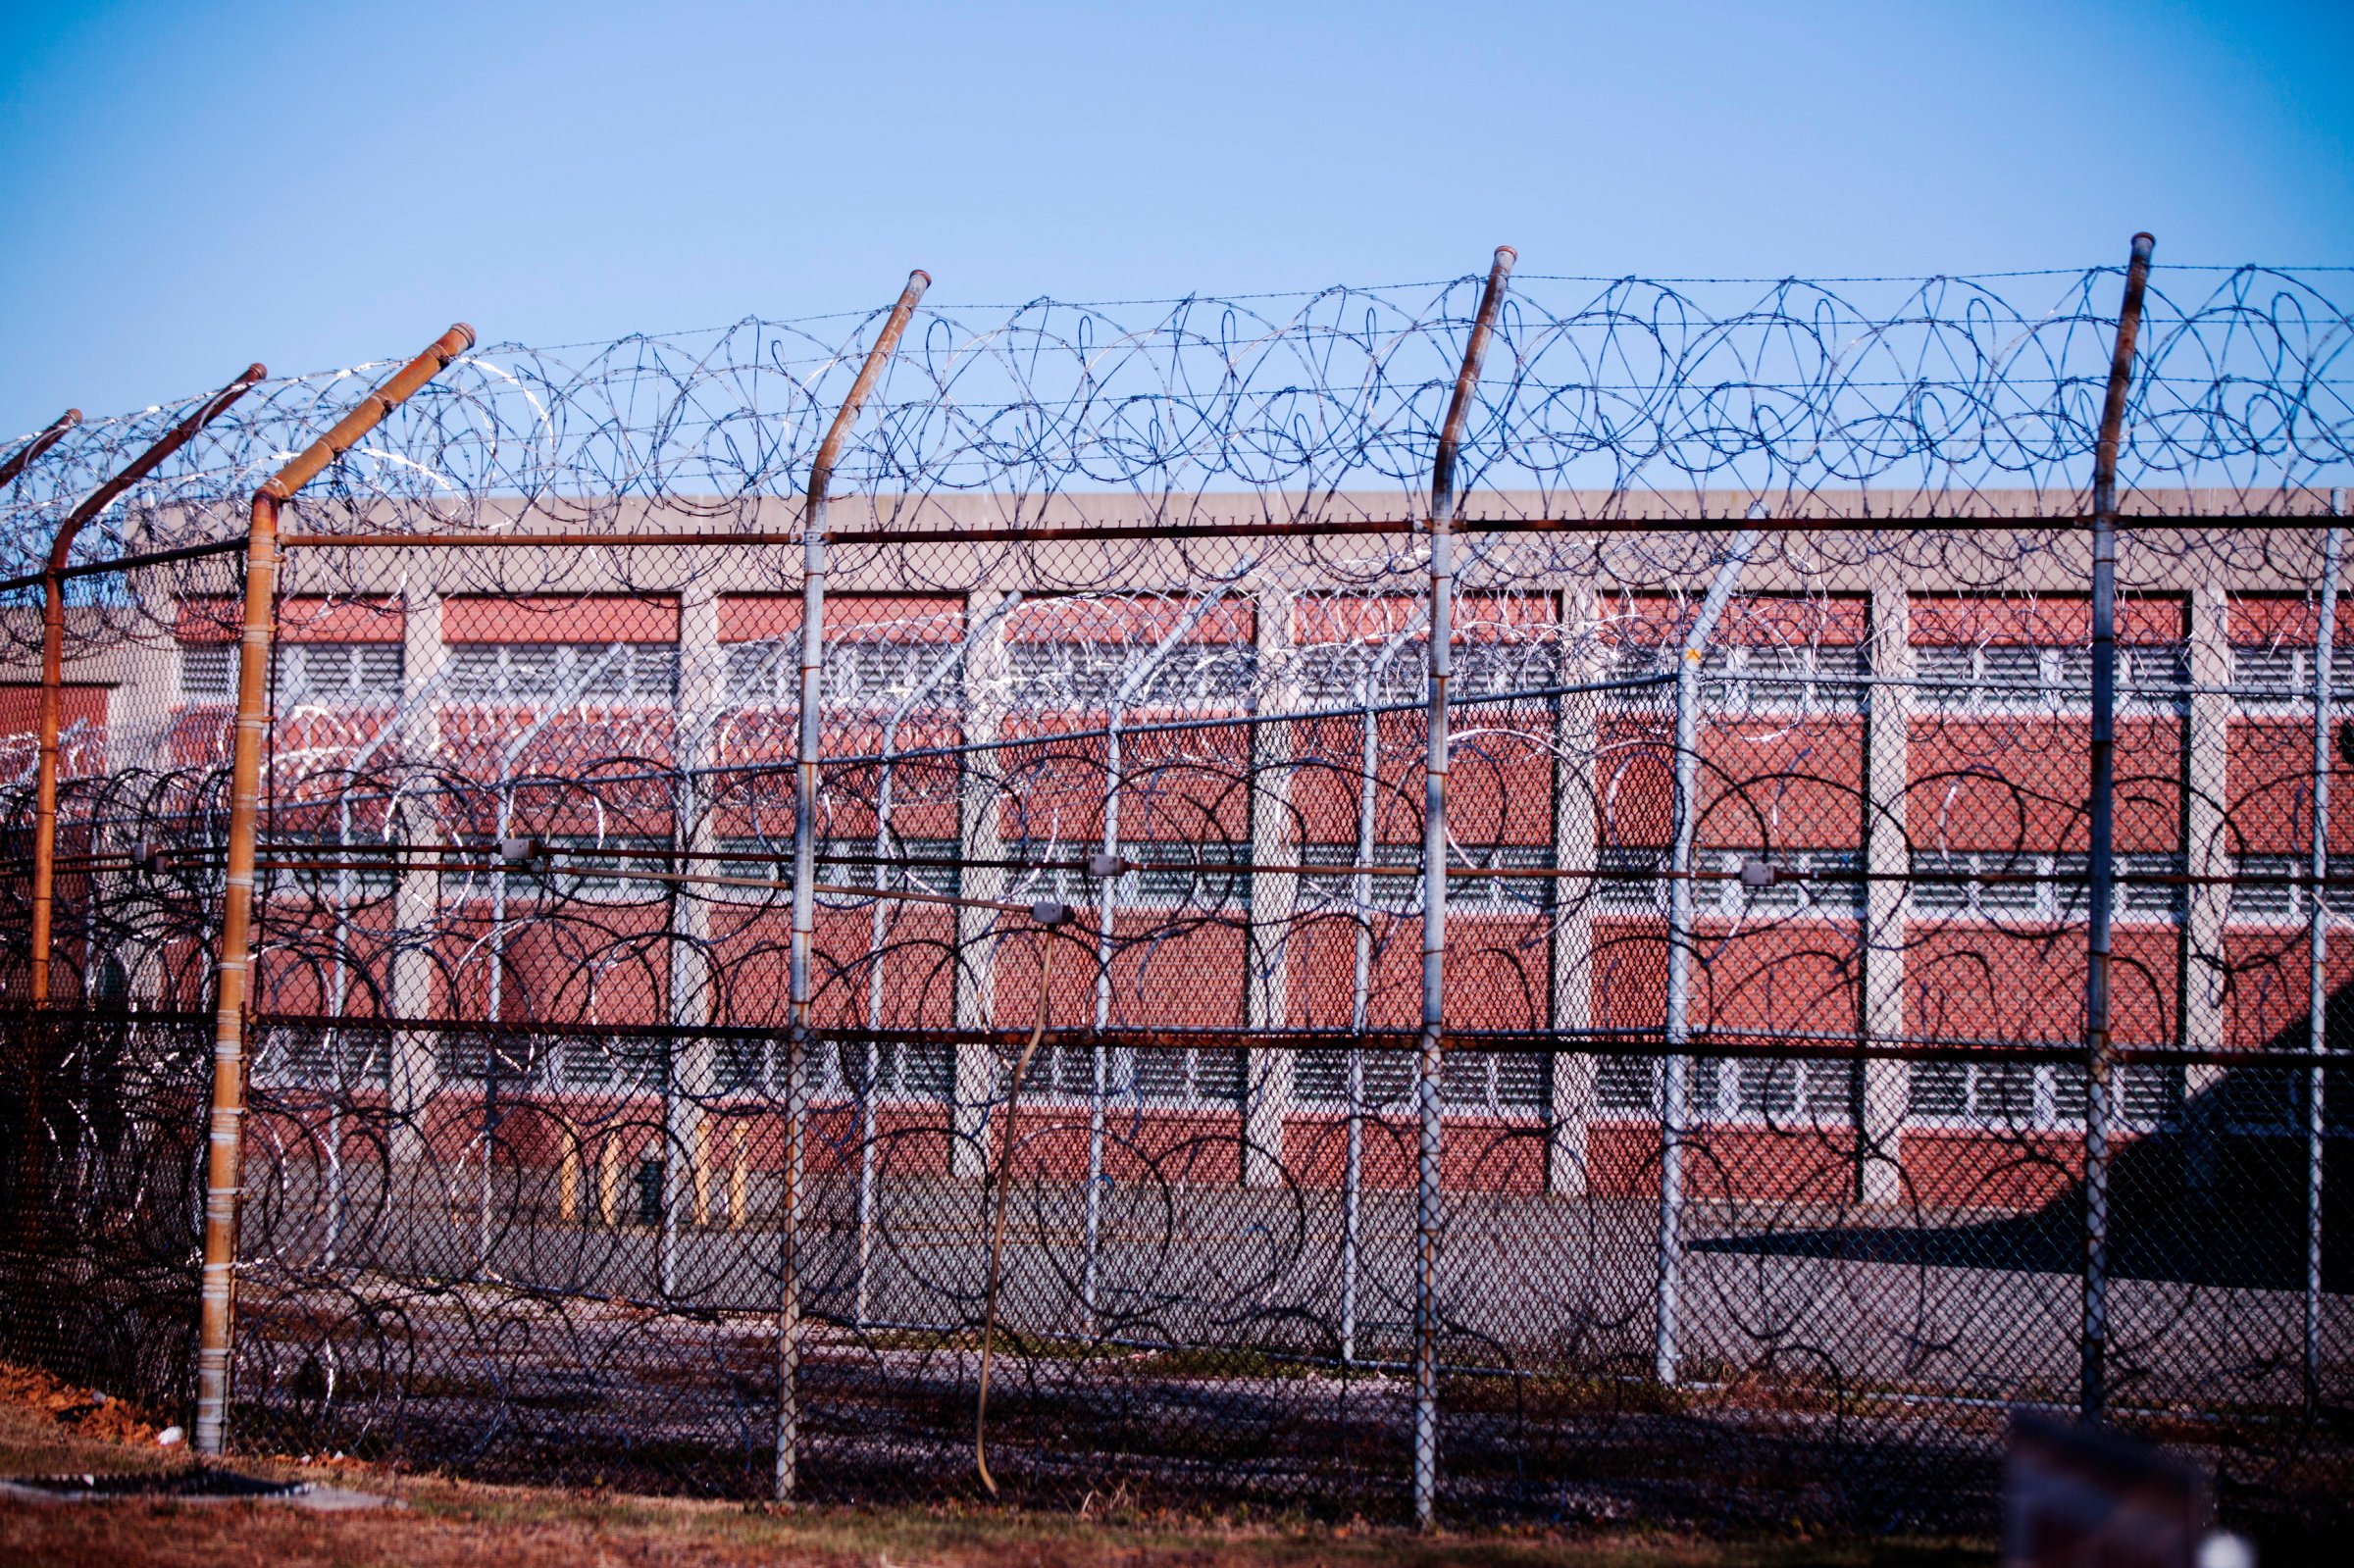 Barbed wire fences surround a building on Rikers Island Correctional Facility in New York on Dec. 24, 2013.